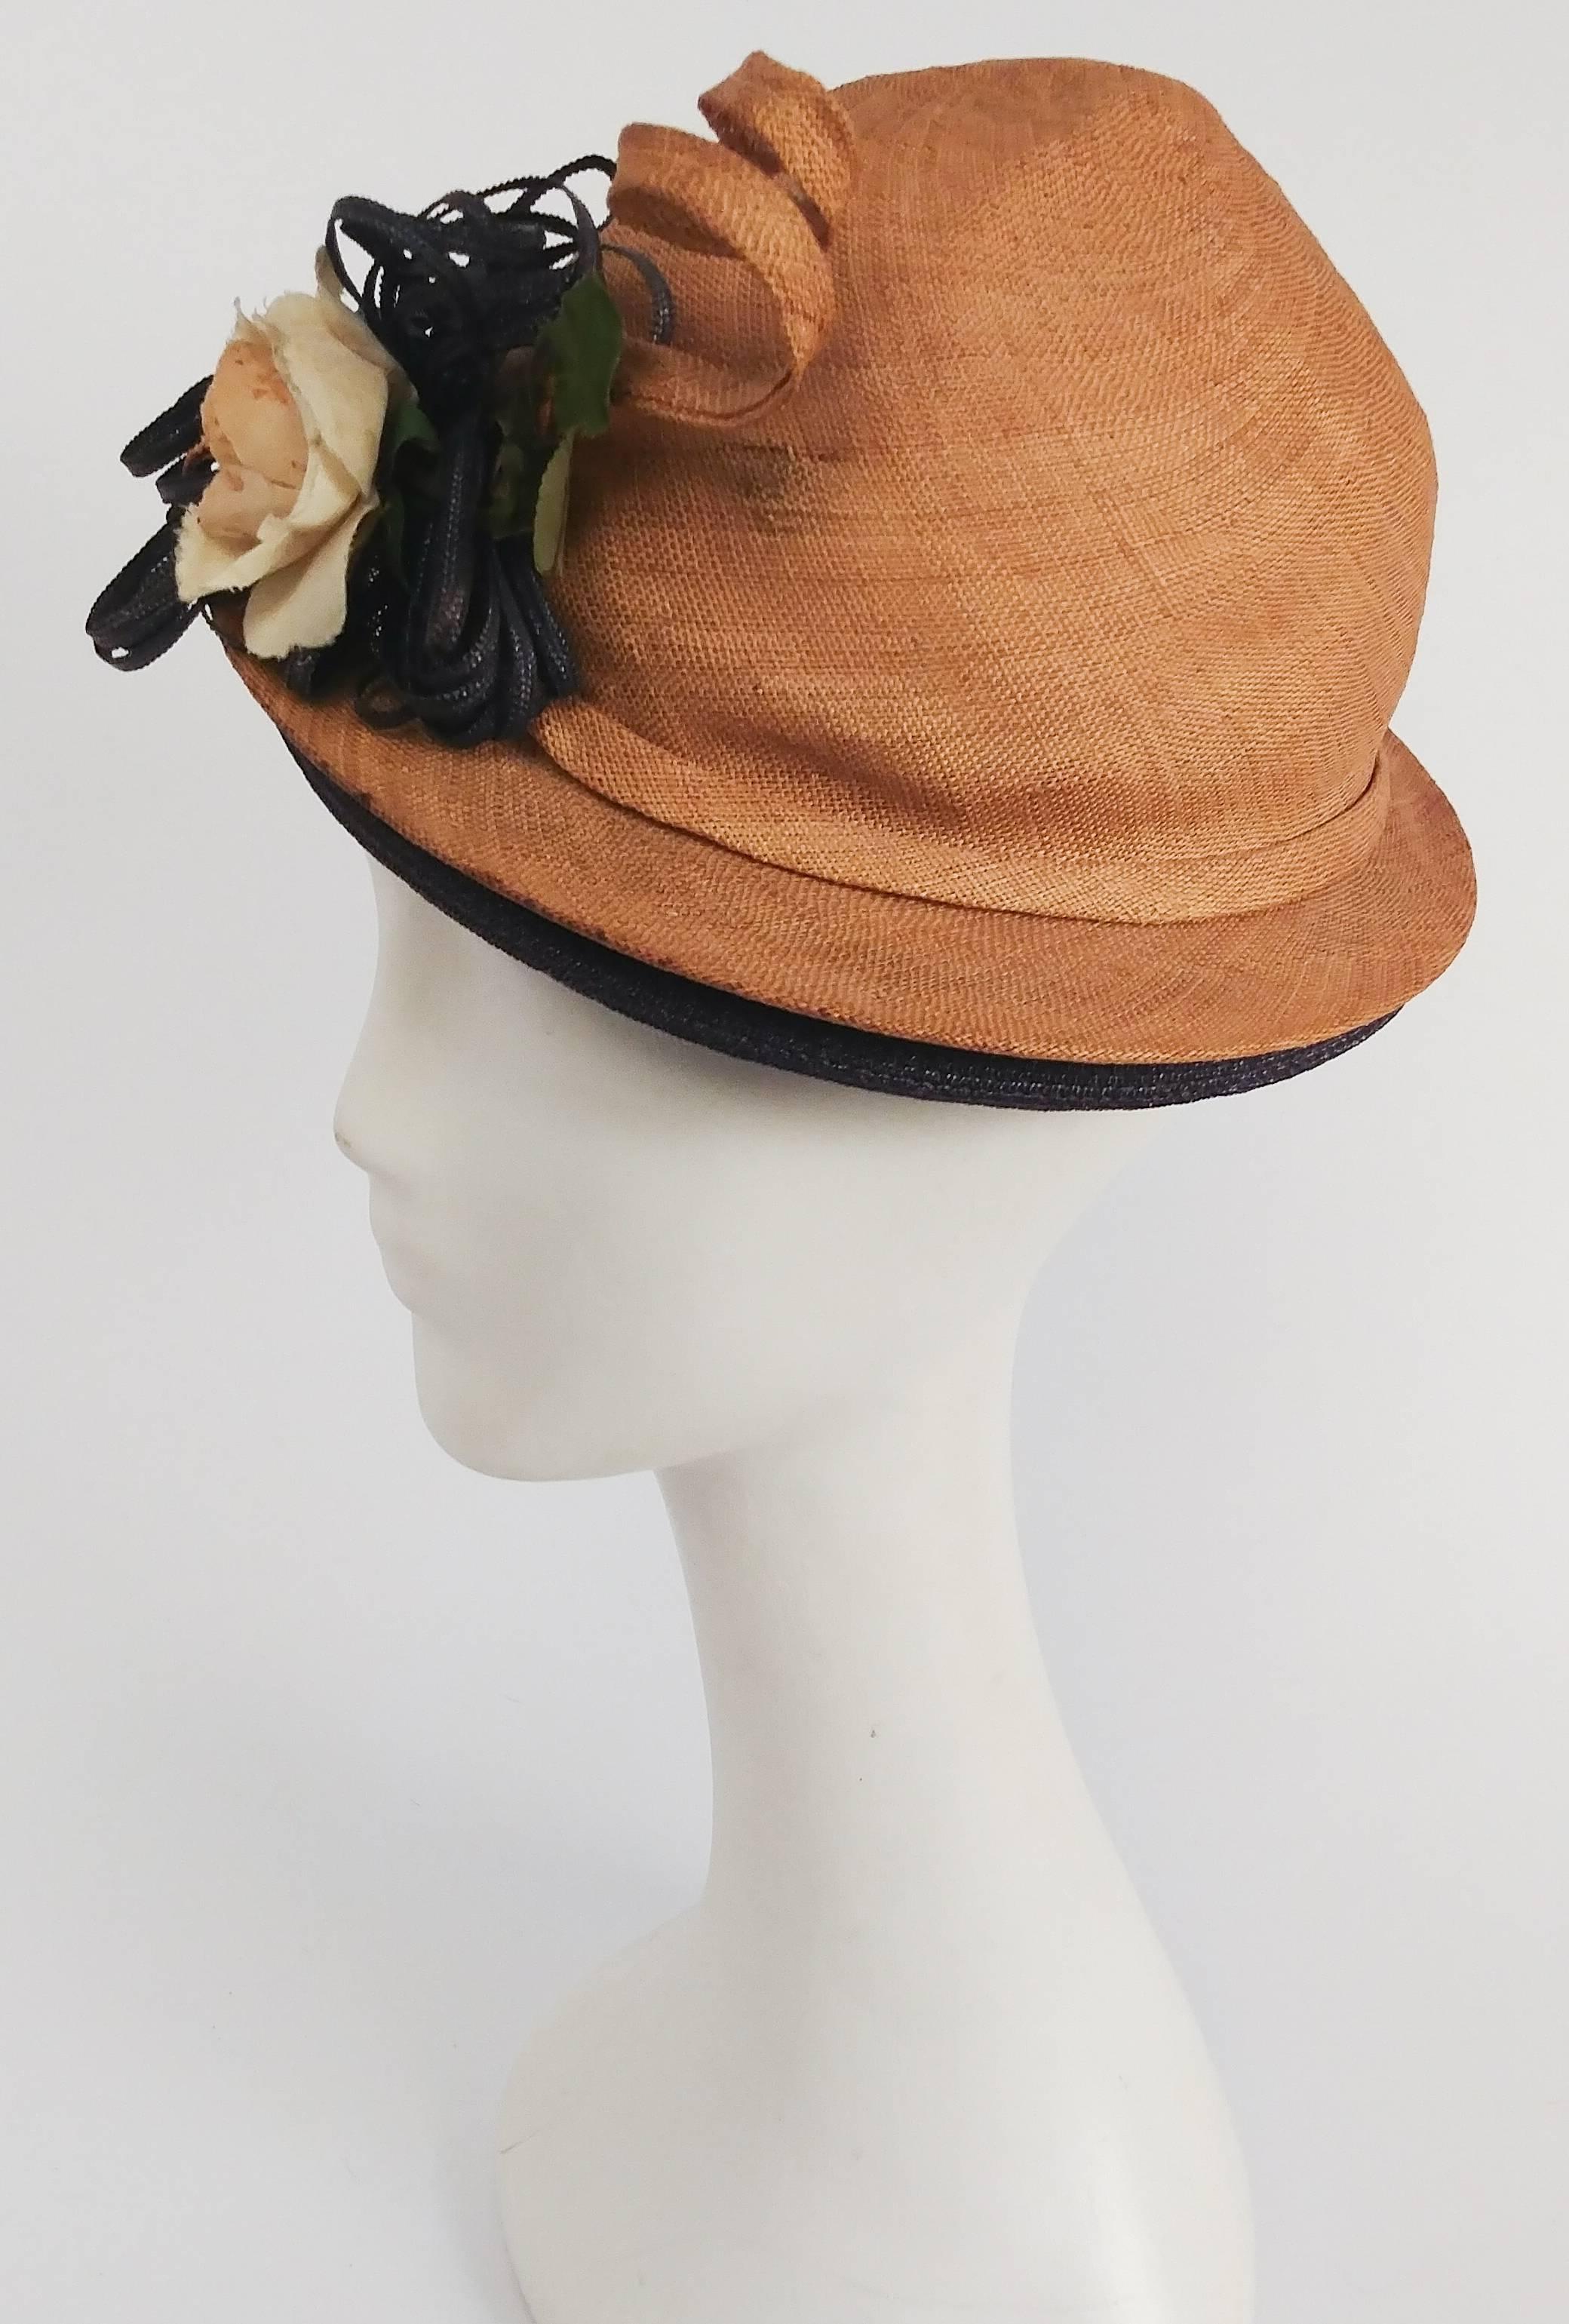 1930s Whimsical Corkscrew Straw Hat. Straw corkscrew springs up from the brim of this hat, which is further embellished with a rose. Wear tilted towards the front of the head for true 1930s flair. 